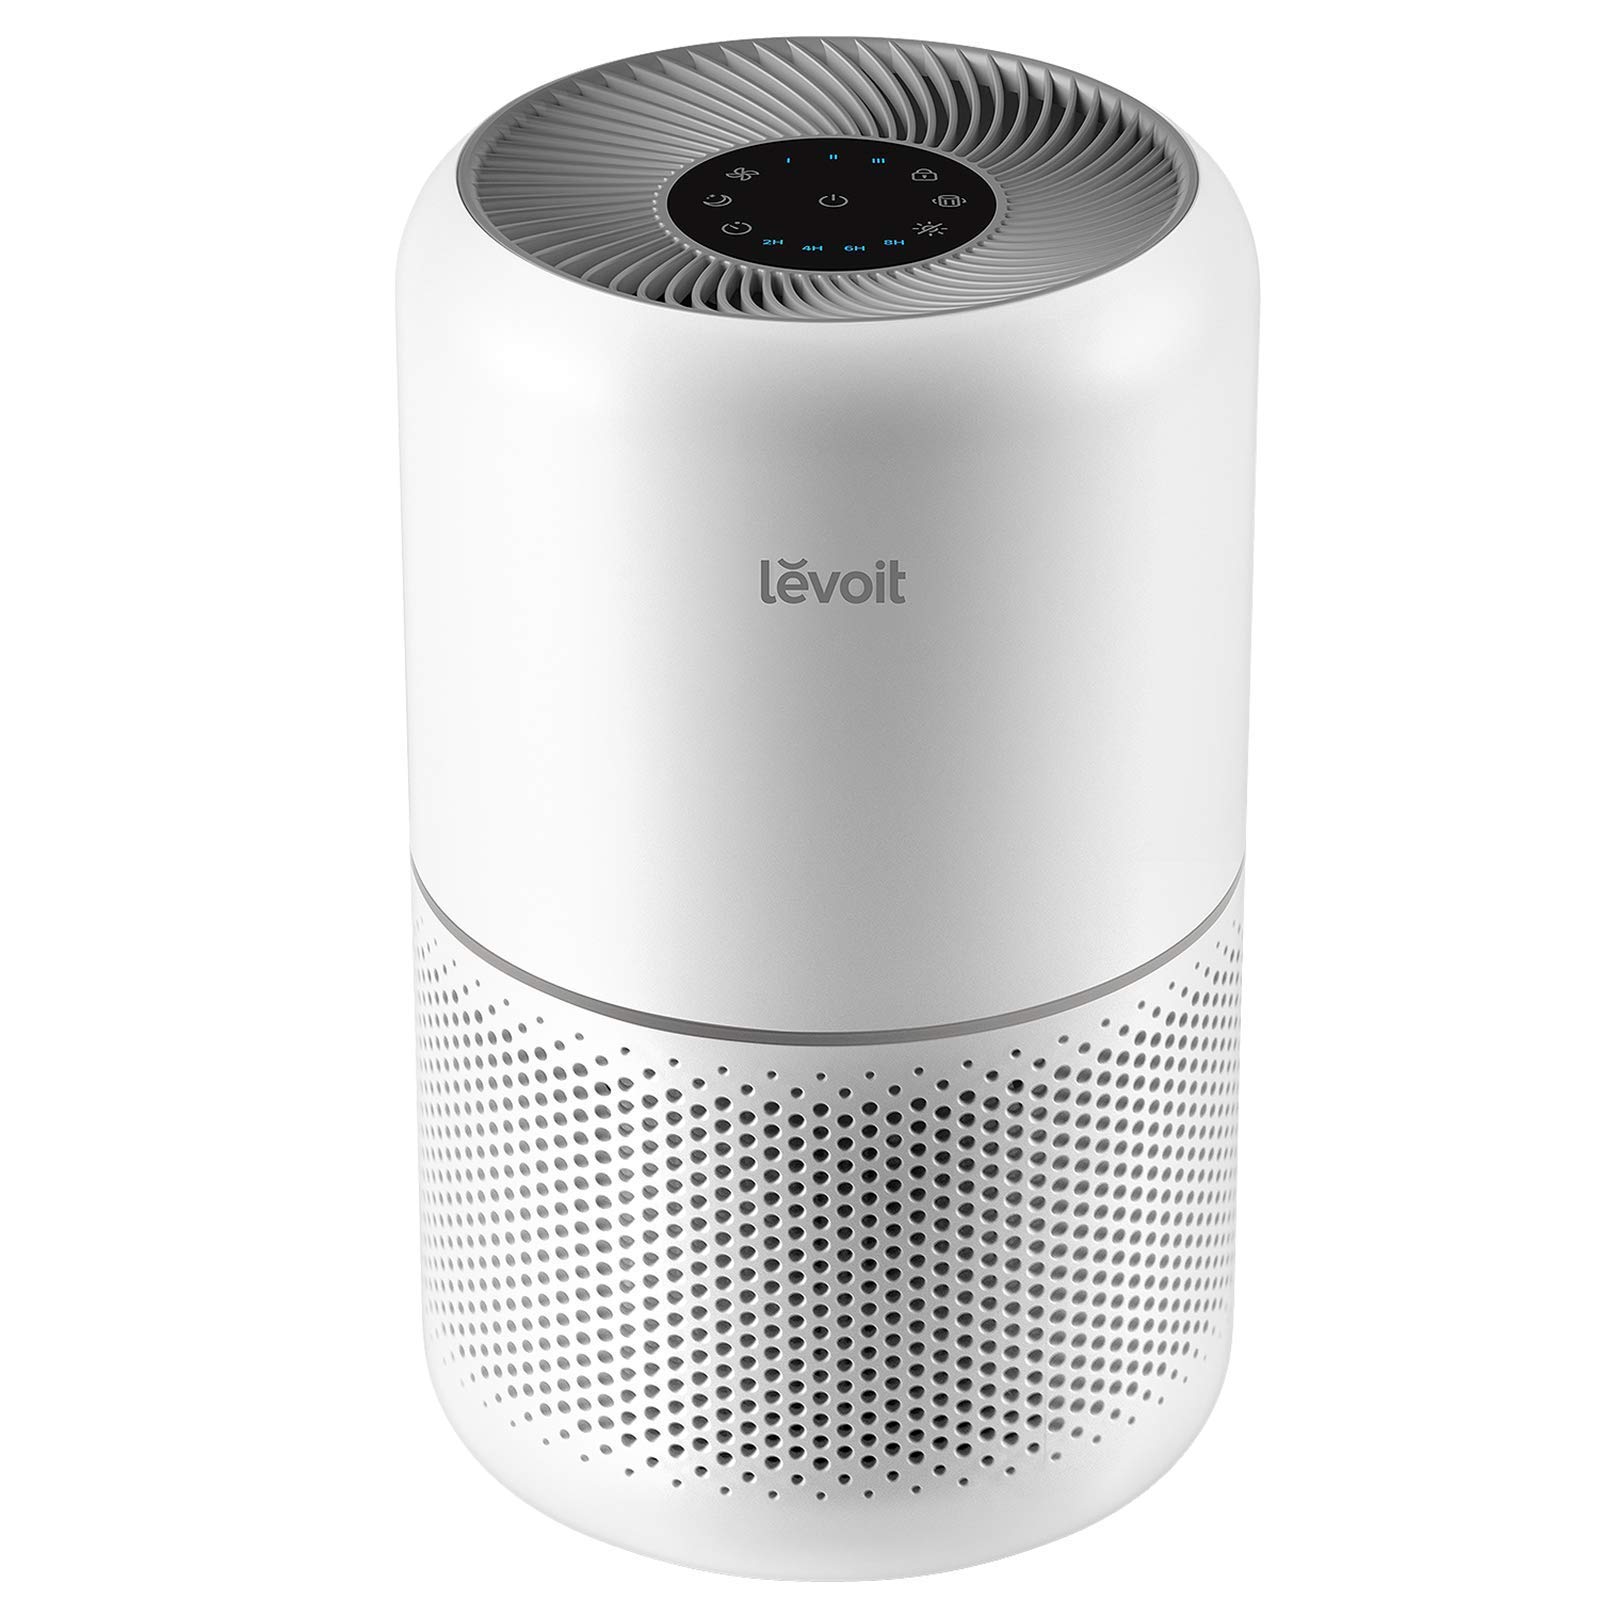 LEVOIT Air Purifier for Home Allergies Pets Hair in Bedroom, Covers Up to 1095 Sq.Foot Powered by 45W High Torque Motor, 3-in-1 Filter, Remove Dust Smoke Pollutants Odor, Core 300, White Cream White